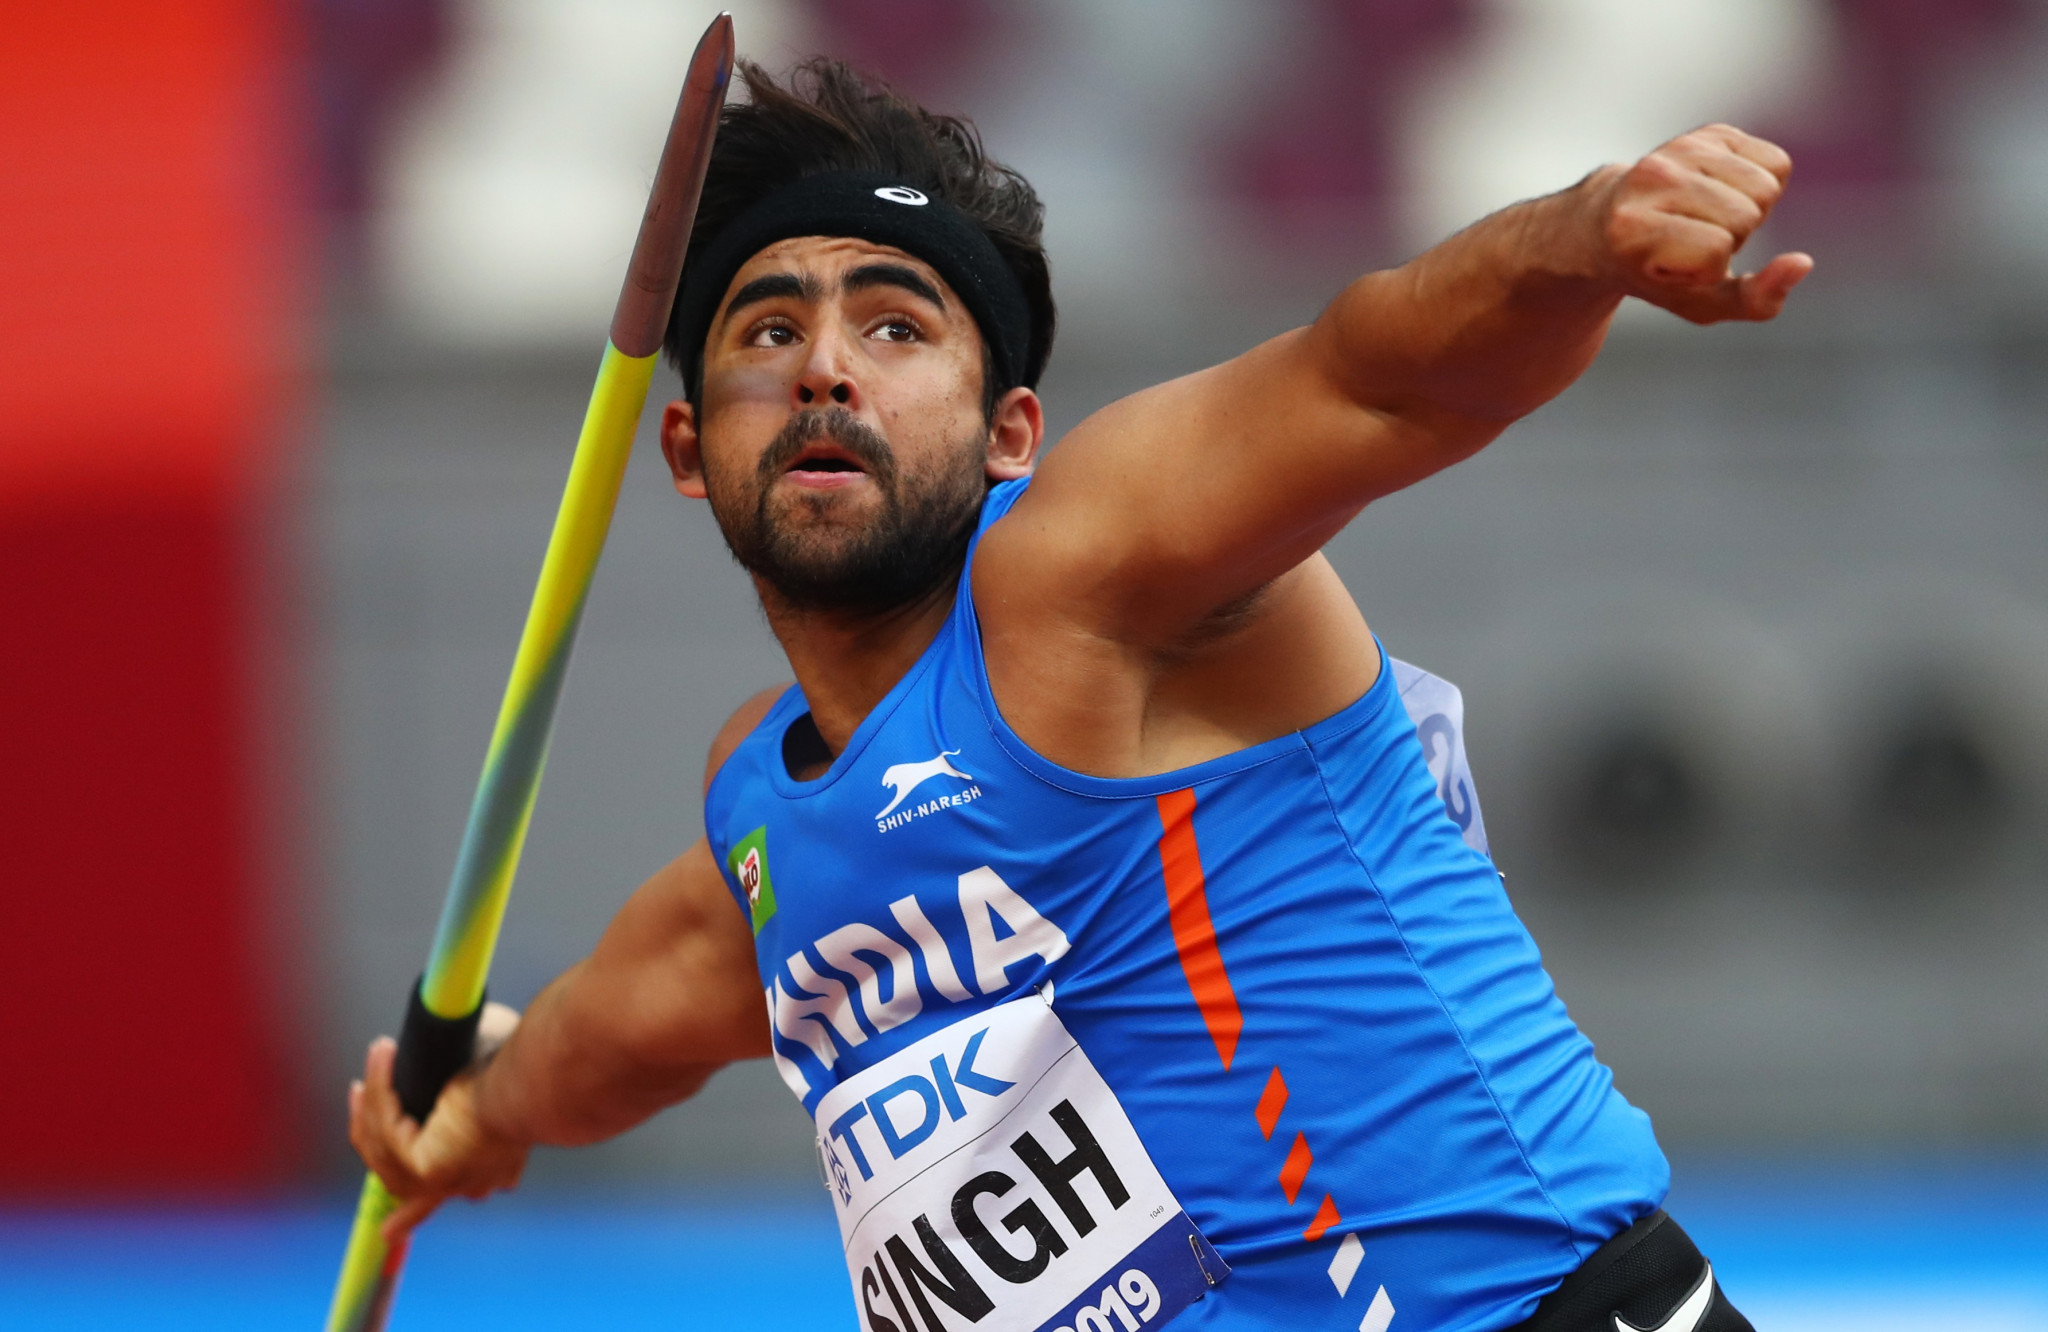 Indian Olympic javelin thrower banned until 2025 for doping